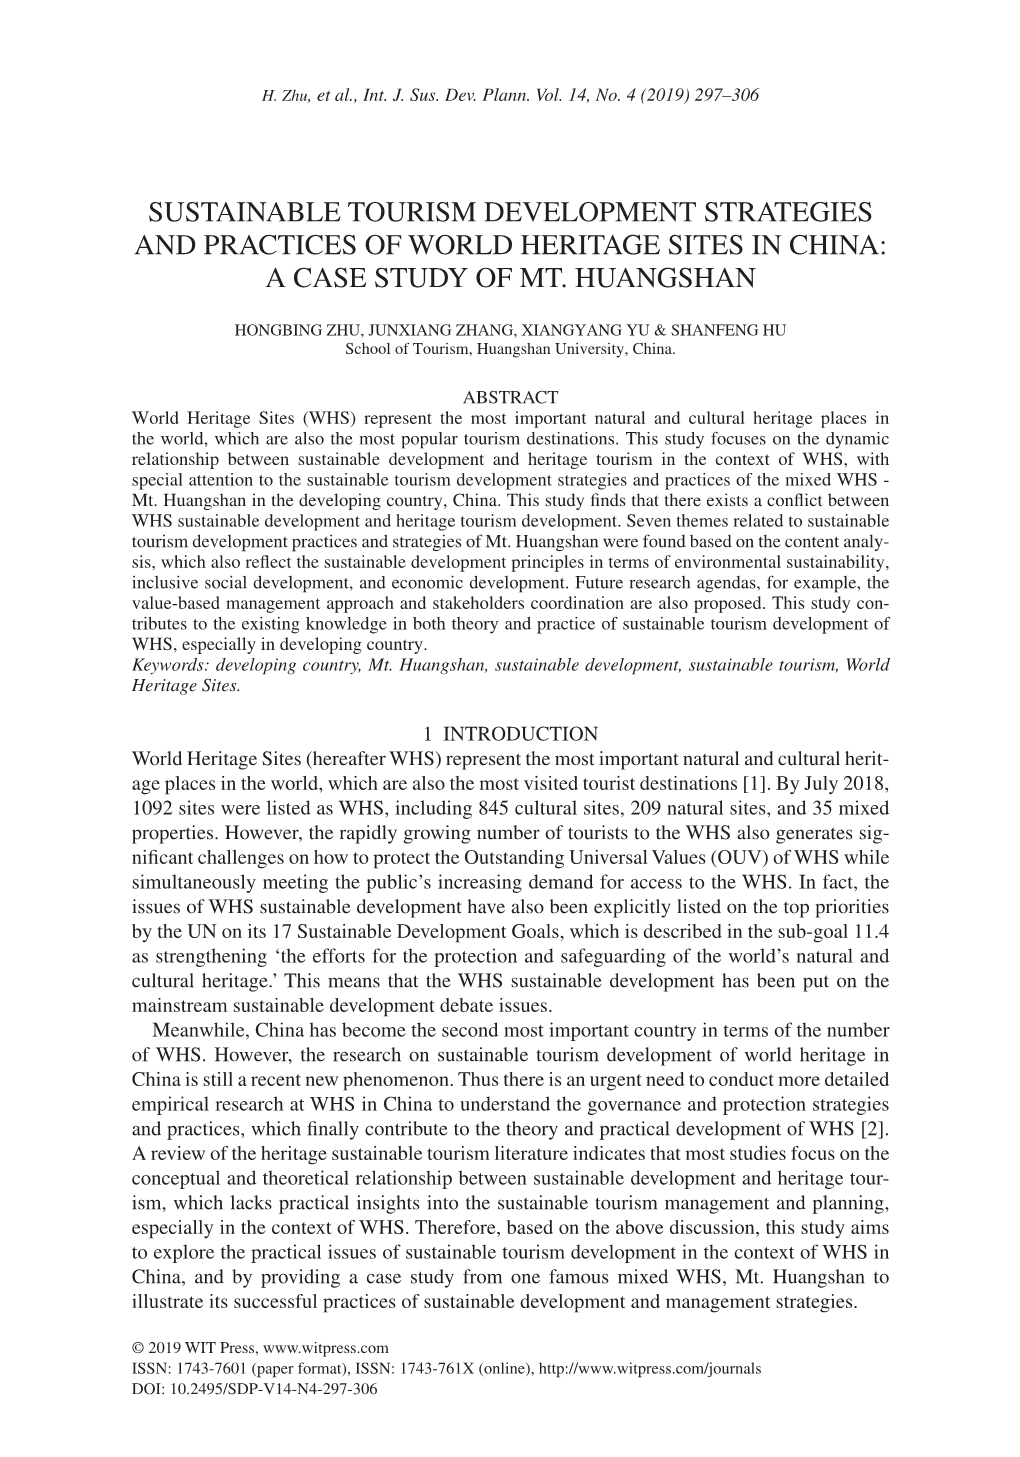 Sustainable Tourism Development Strategies and Practices of World Heritage Sites in China: a Case Study of Mt